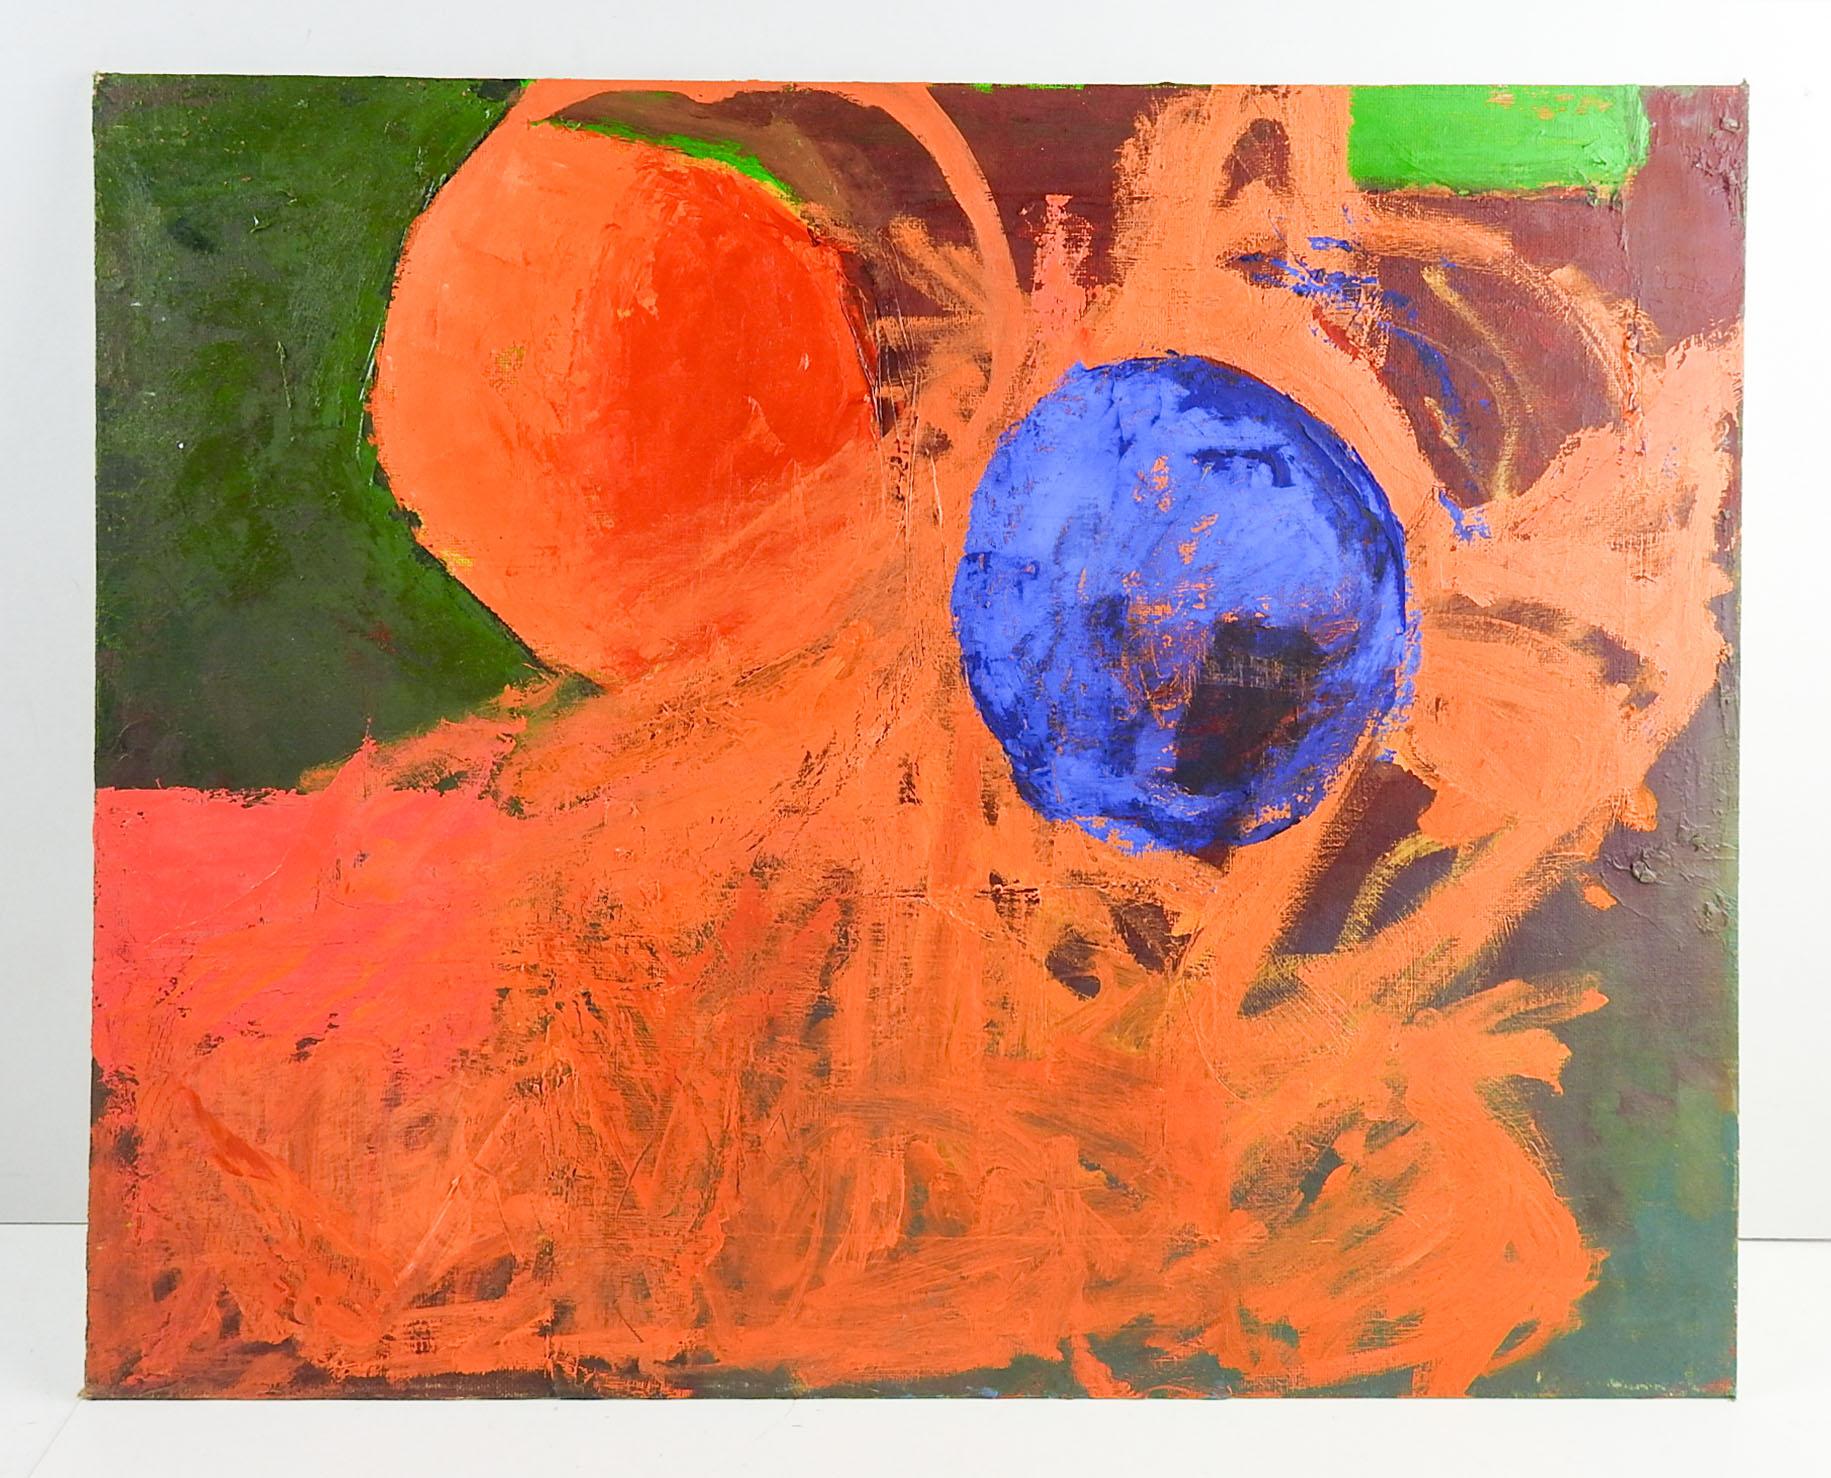 Oil on canvas board abstract orange and blue spheres by Bruce W. Clements (1936-2008) Mass. Unsigned from the artists estate. Unframed.